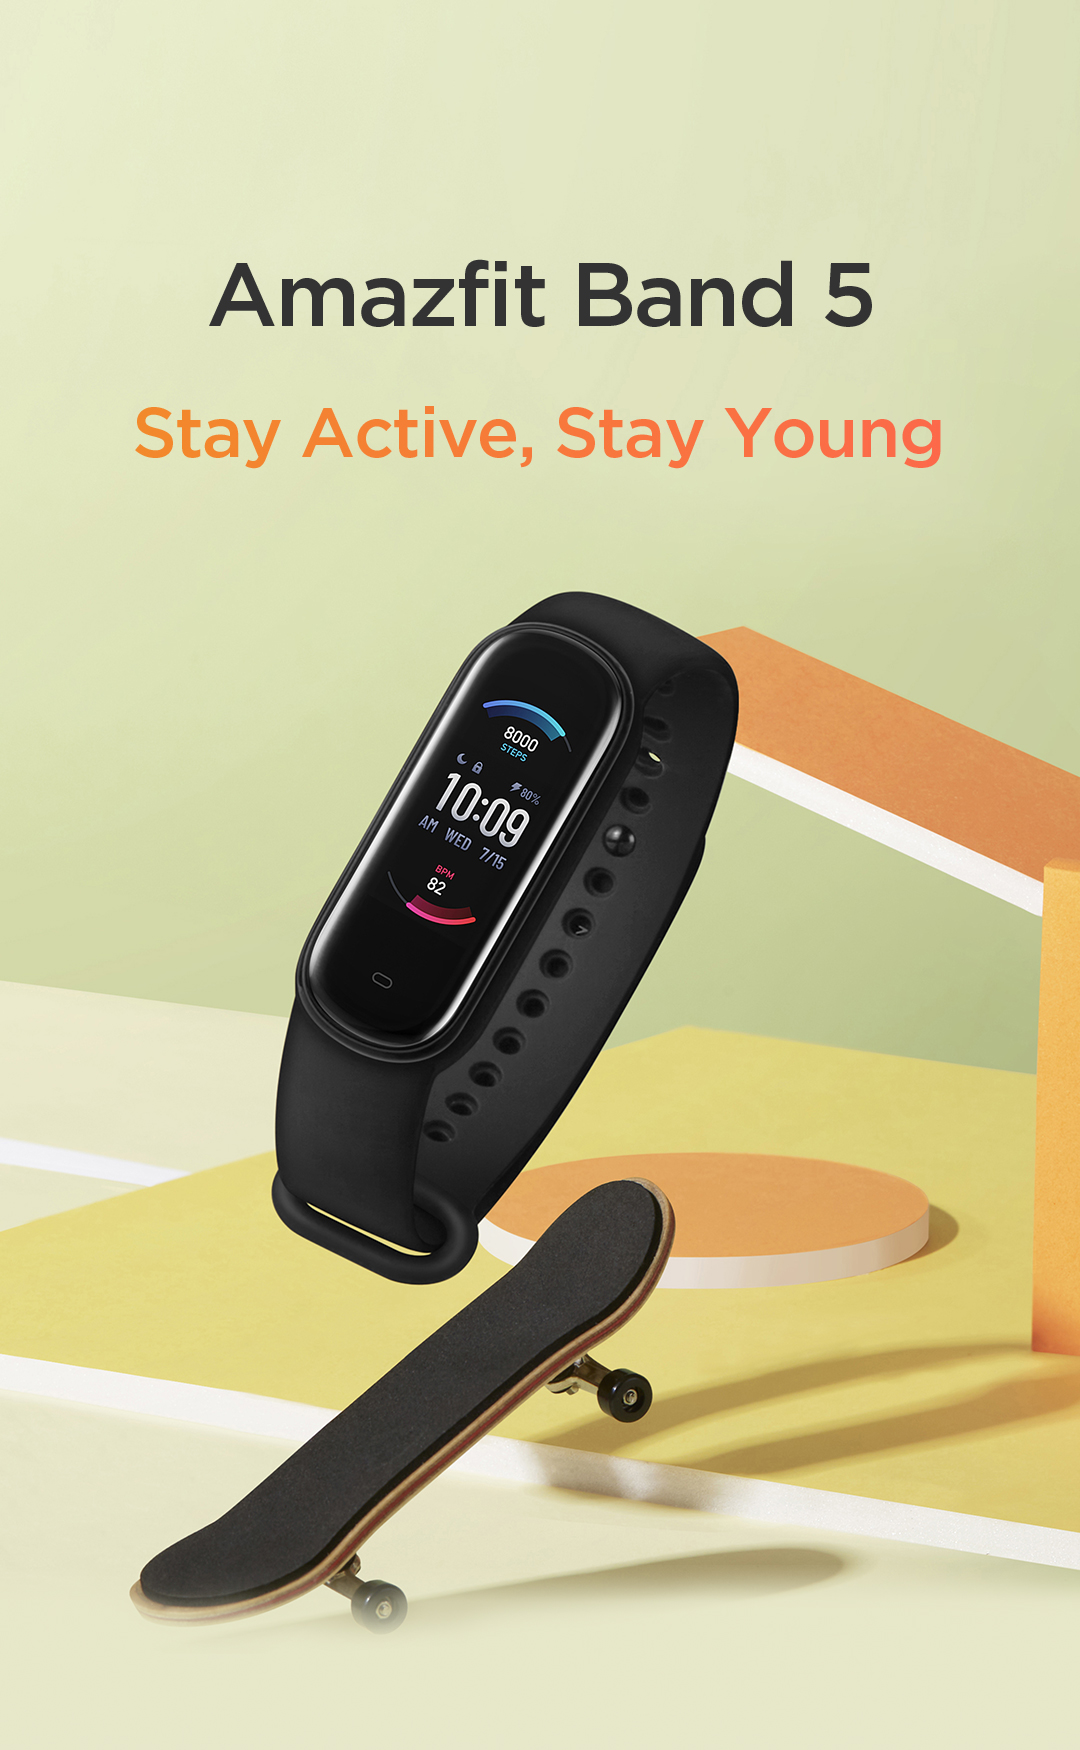 Amazfit Band 5 - Stay Active, Stay Young